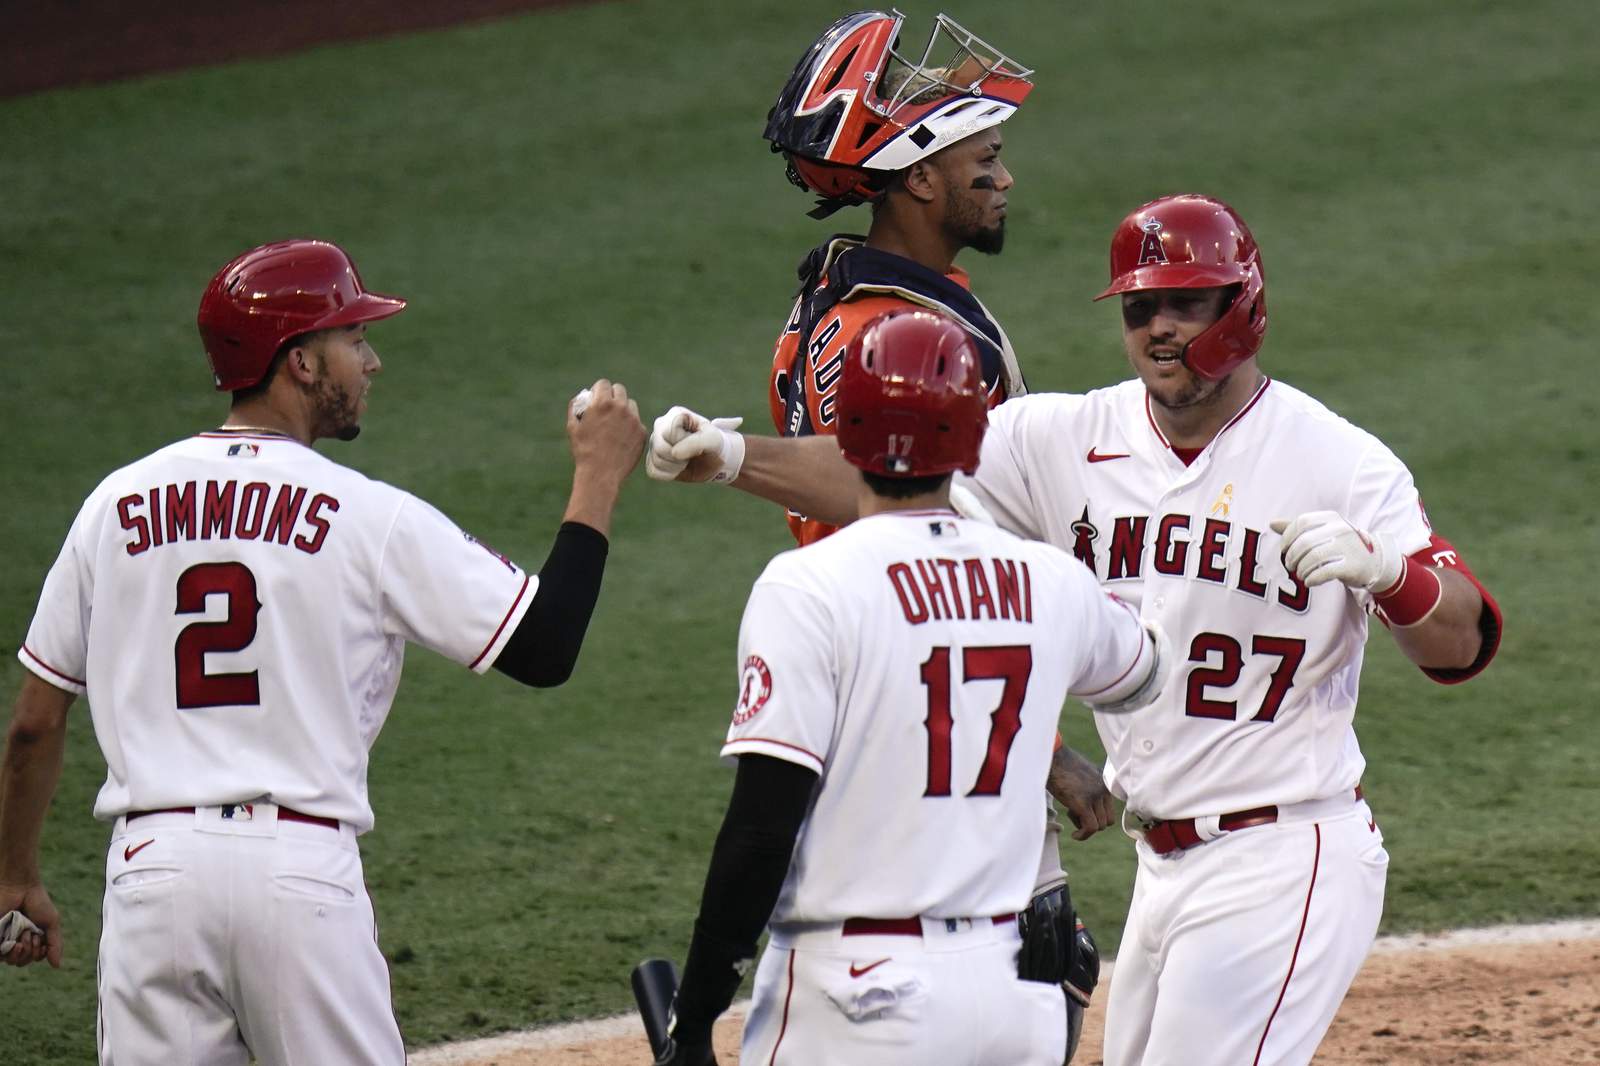 Trout hits 300th career home run, sets Angels career mark